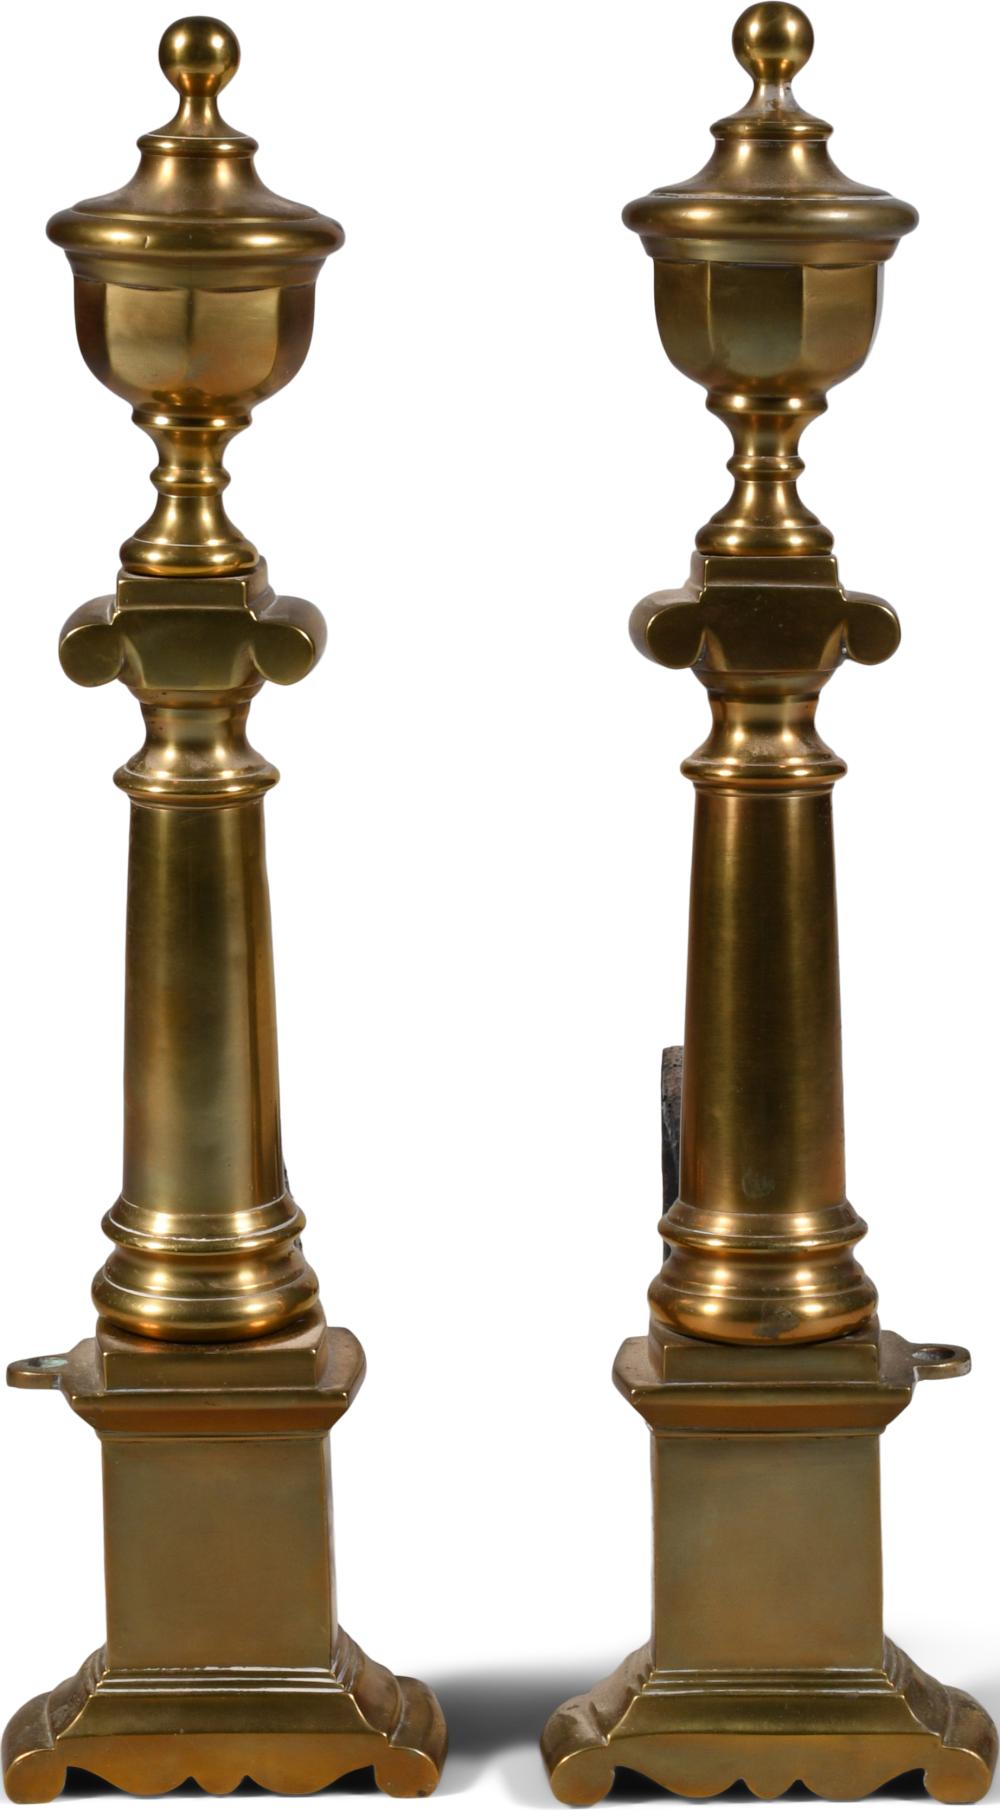 PAIR OF LATE FEDERAL BRASS ANDIRONS  33d8d6